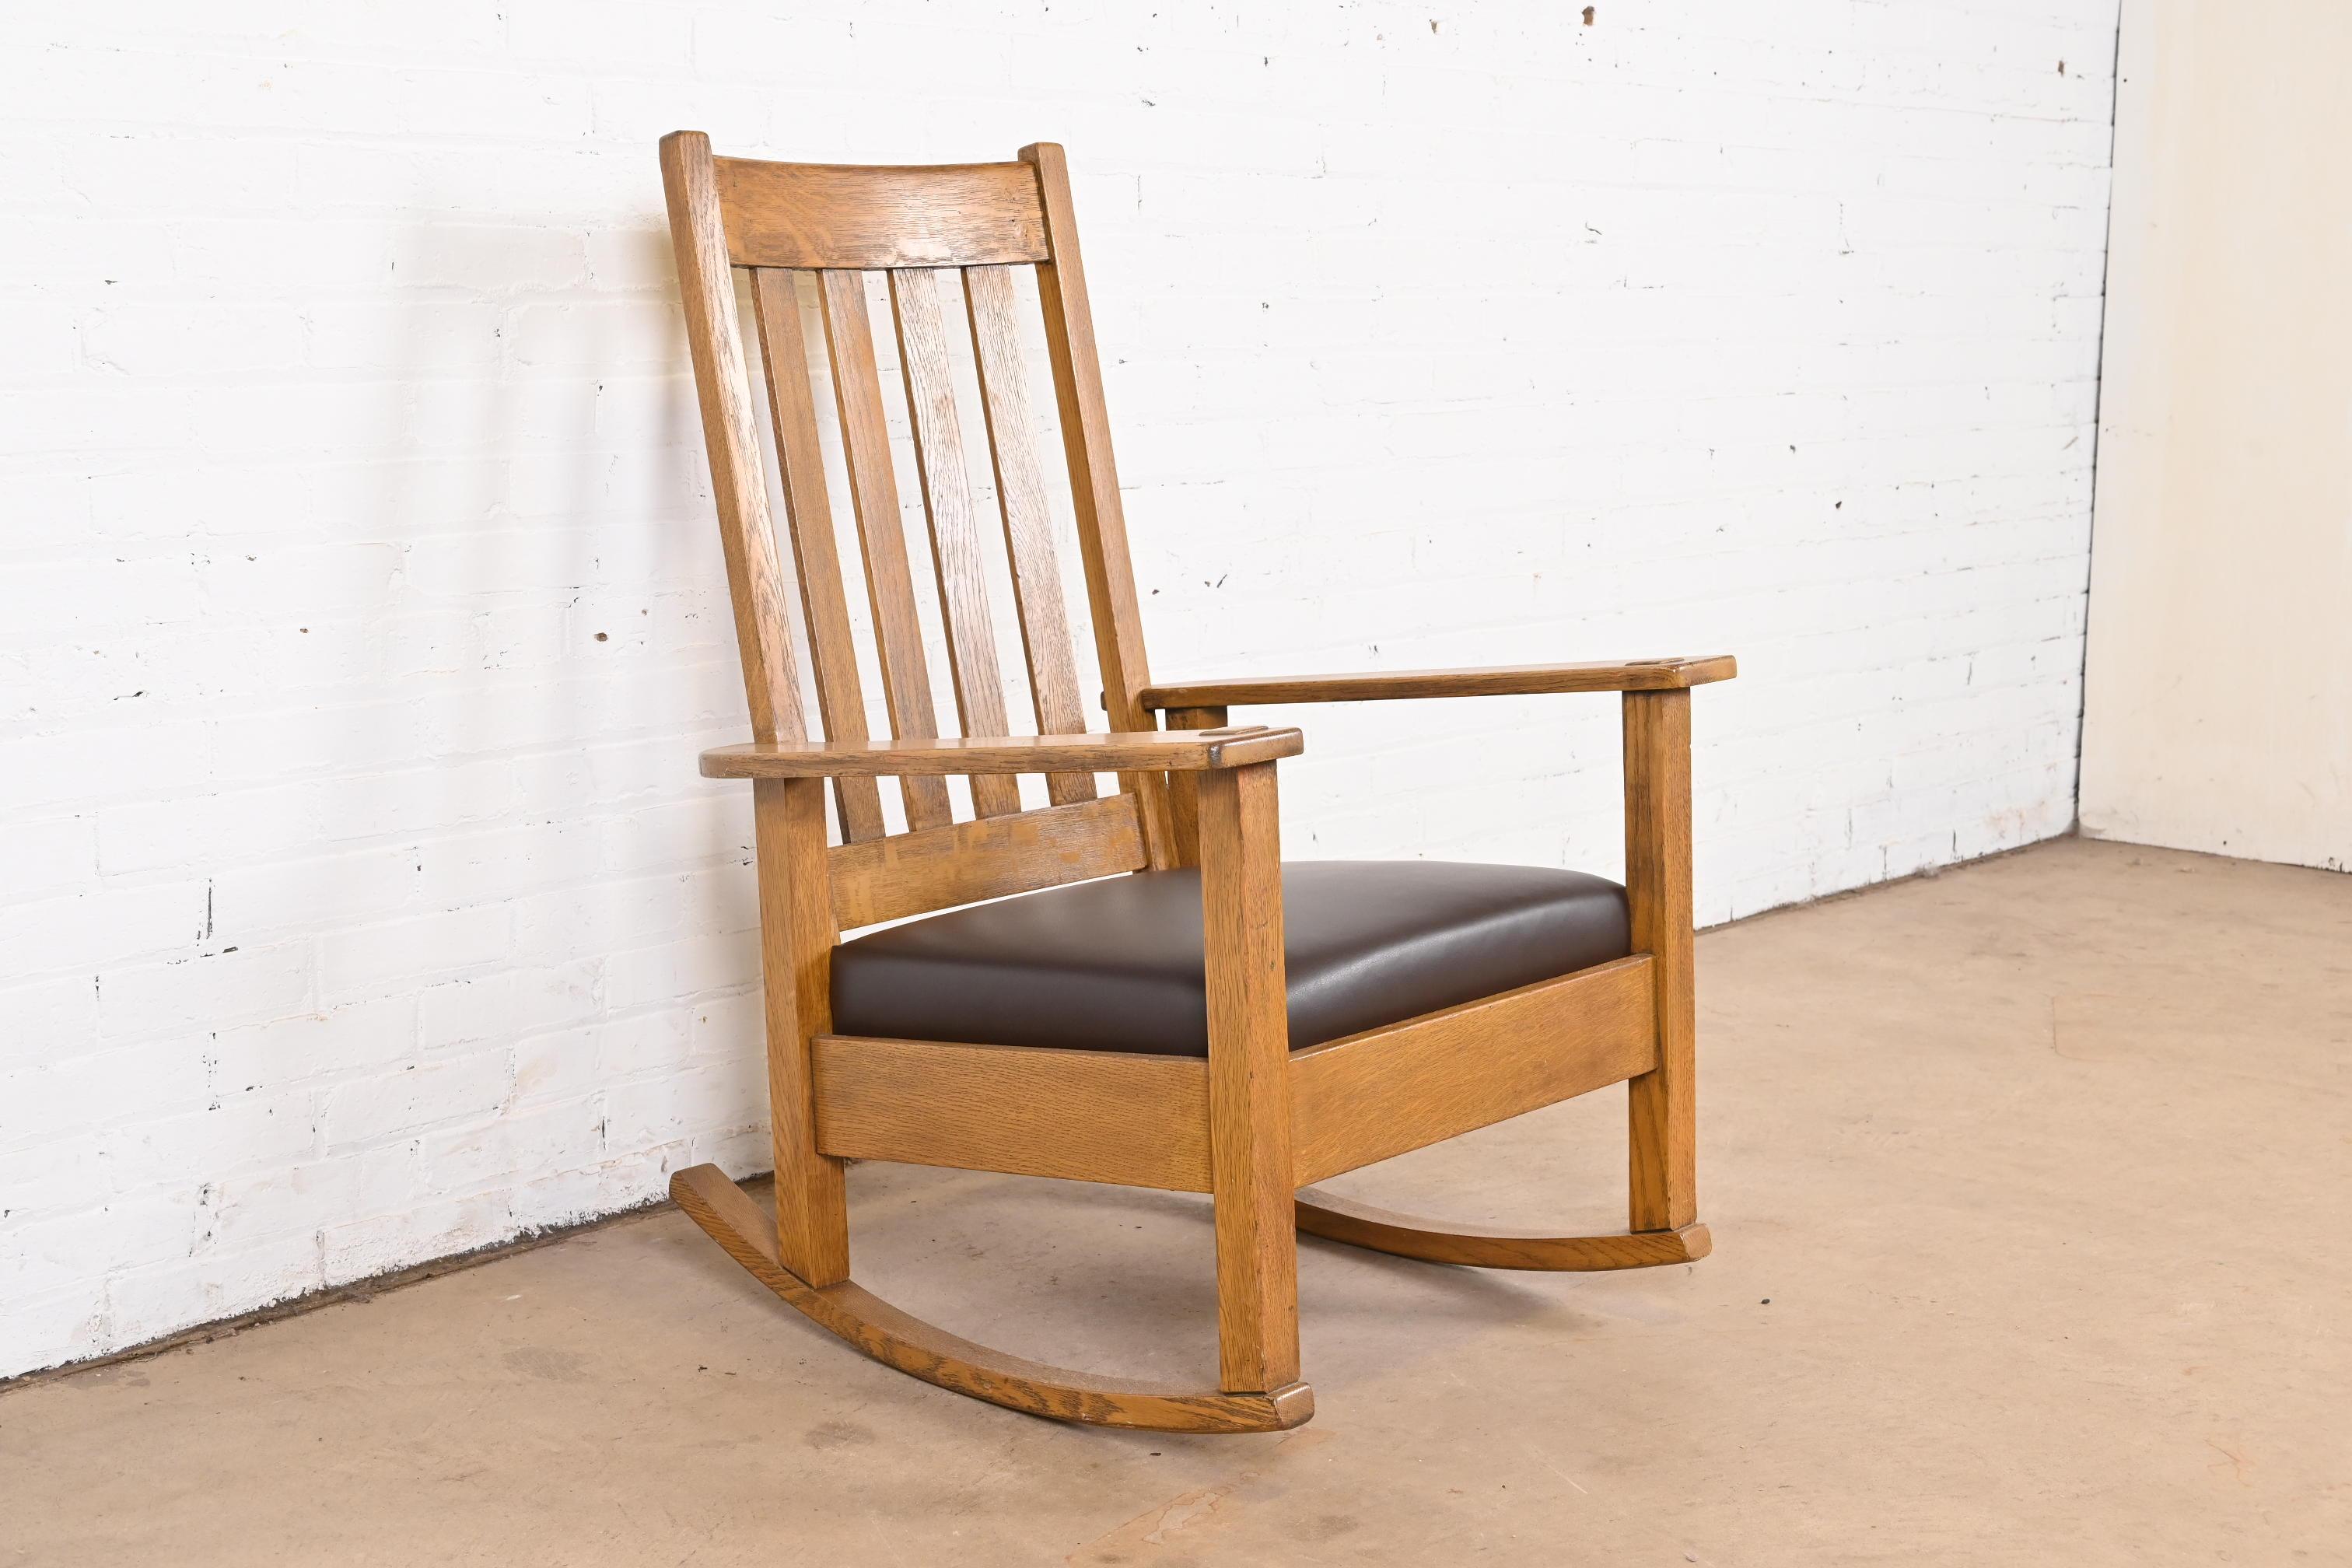 American Stickley Brothers Arts & Crafts Oak and Leather Rocking Chair, Circa 1900